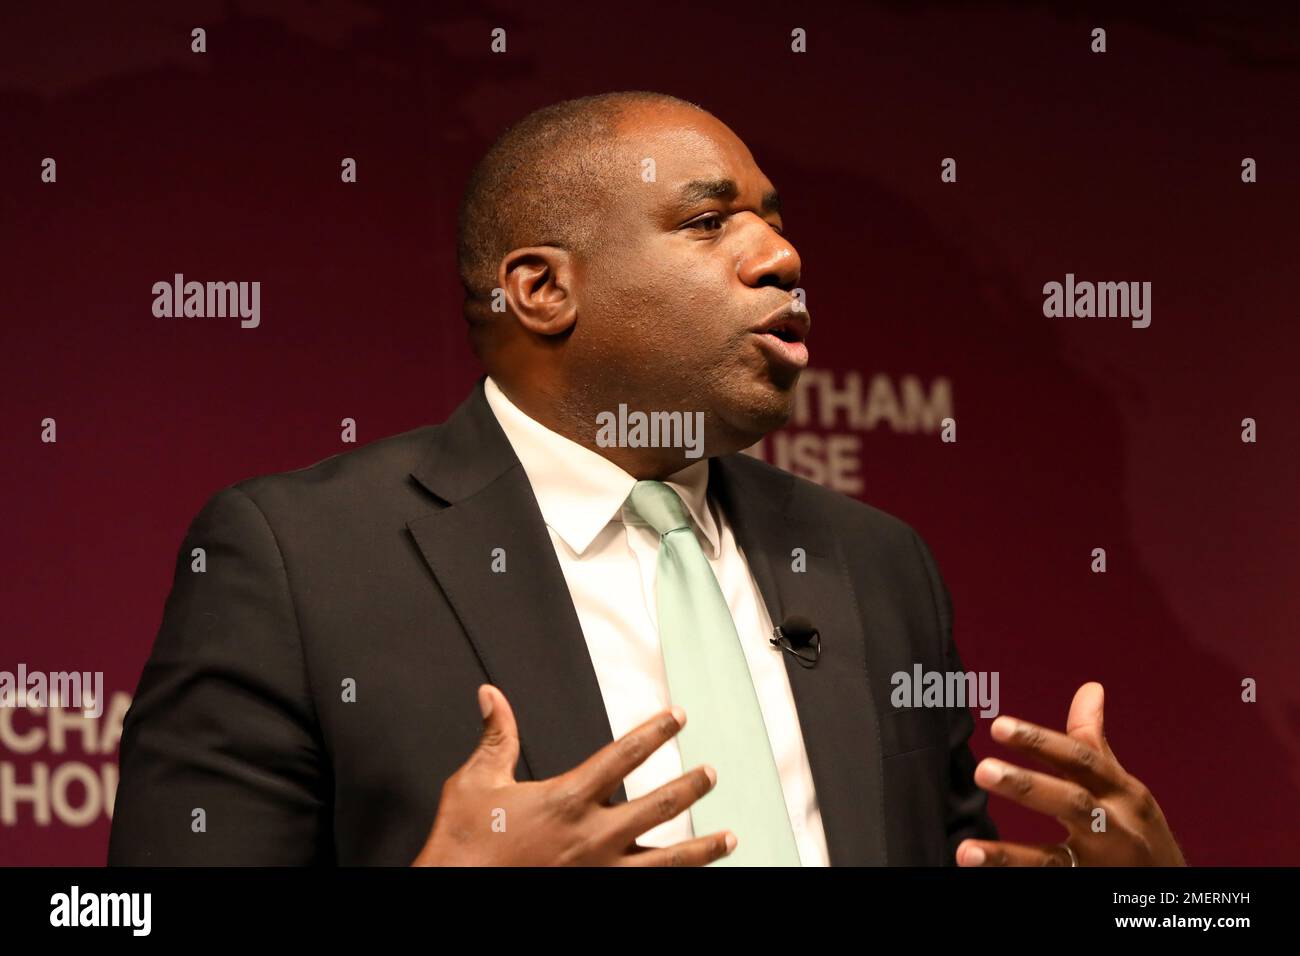 David Lammy, Labour Party shadow foreign secretary, speaking at Chatham House in London on 24 January 2023 Stock Photo